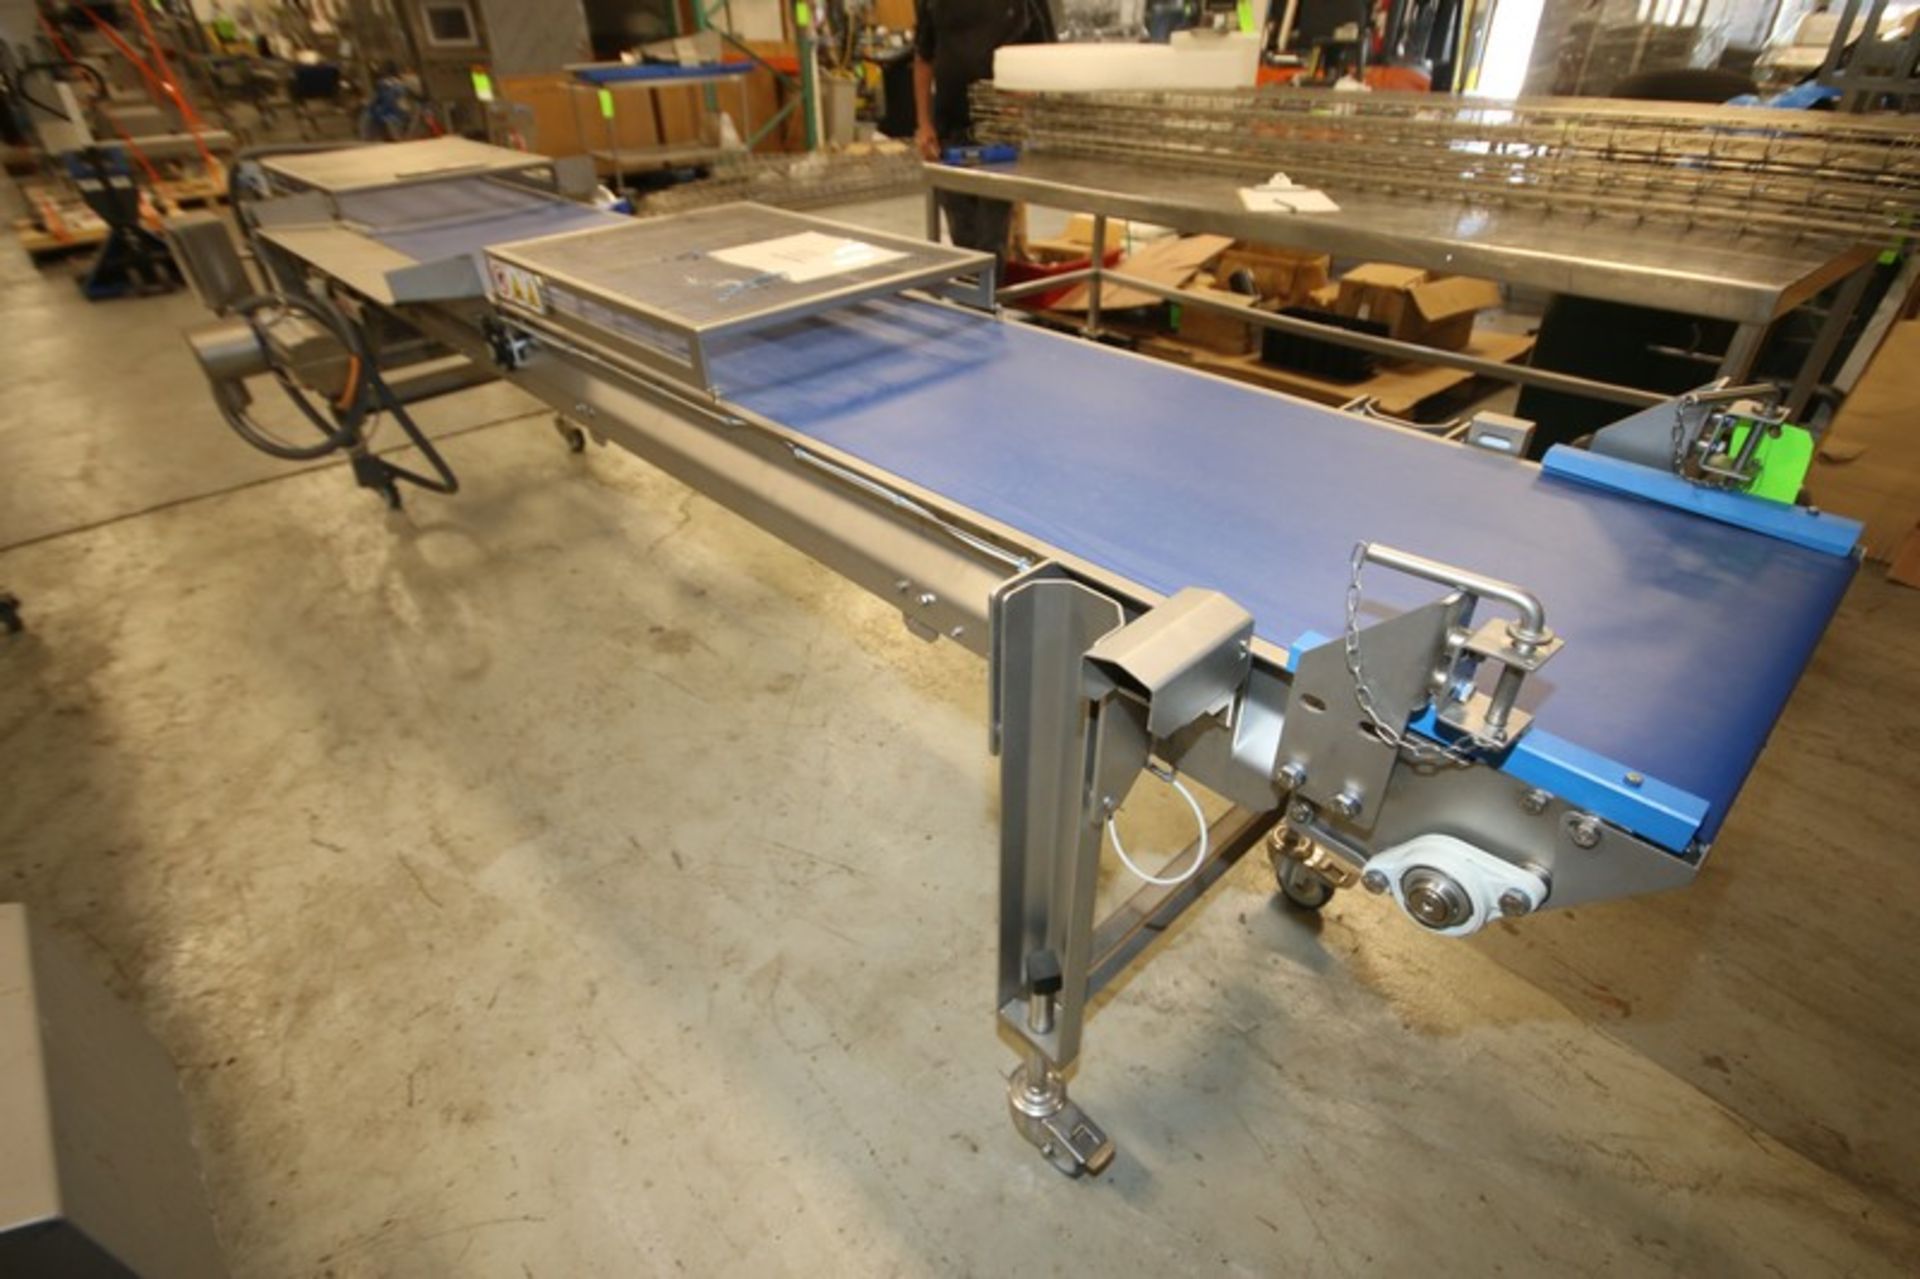 2019 Alimec Aprox. 159" L x 19 1/2" W x 34" H S/S Belt Conveyor, SN 813-55, with Bauer S/S Drive - Image 5 of 6